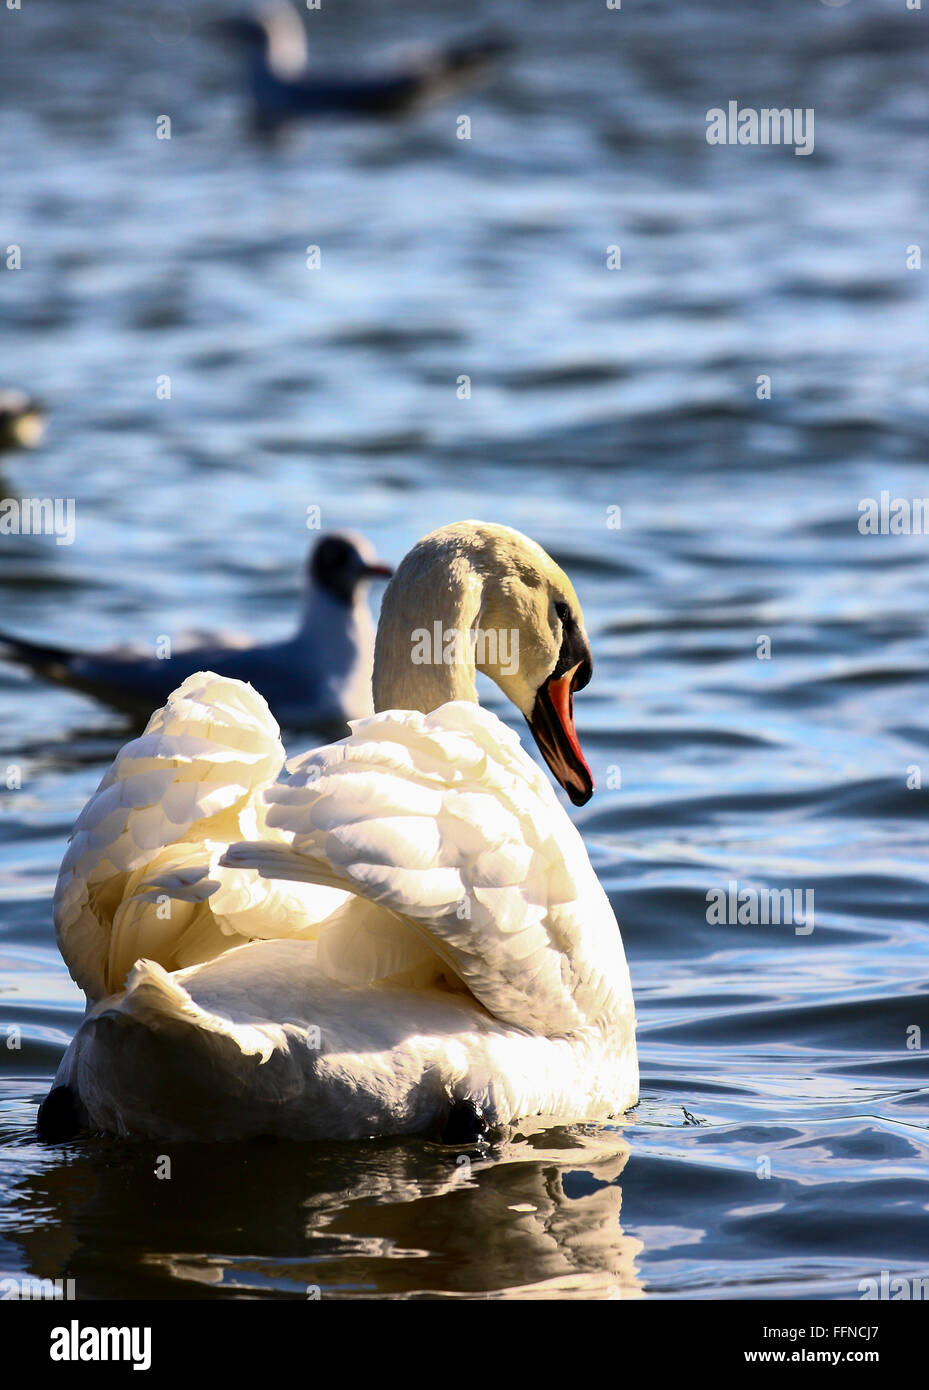 Leeds, UK. 16th Feb, 2016. As the school half term continues a cold but sunny day gave families the chance to visit Roundhay Park near Leeds, West Yorkshire. The swans were also enjoying the sunshine on their feathers. Taken on the 16th February 2016. Credit:  Andrew Gardner/Alamy Live News Stock Photo